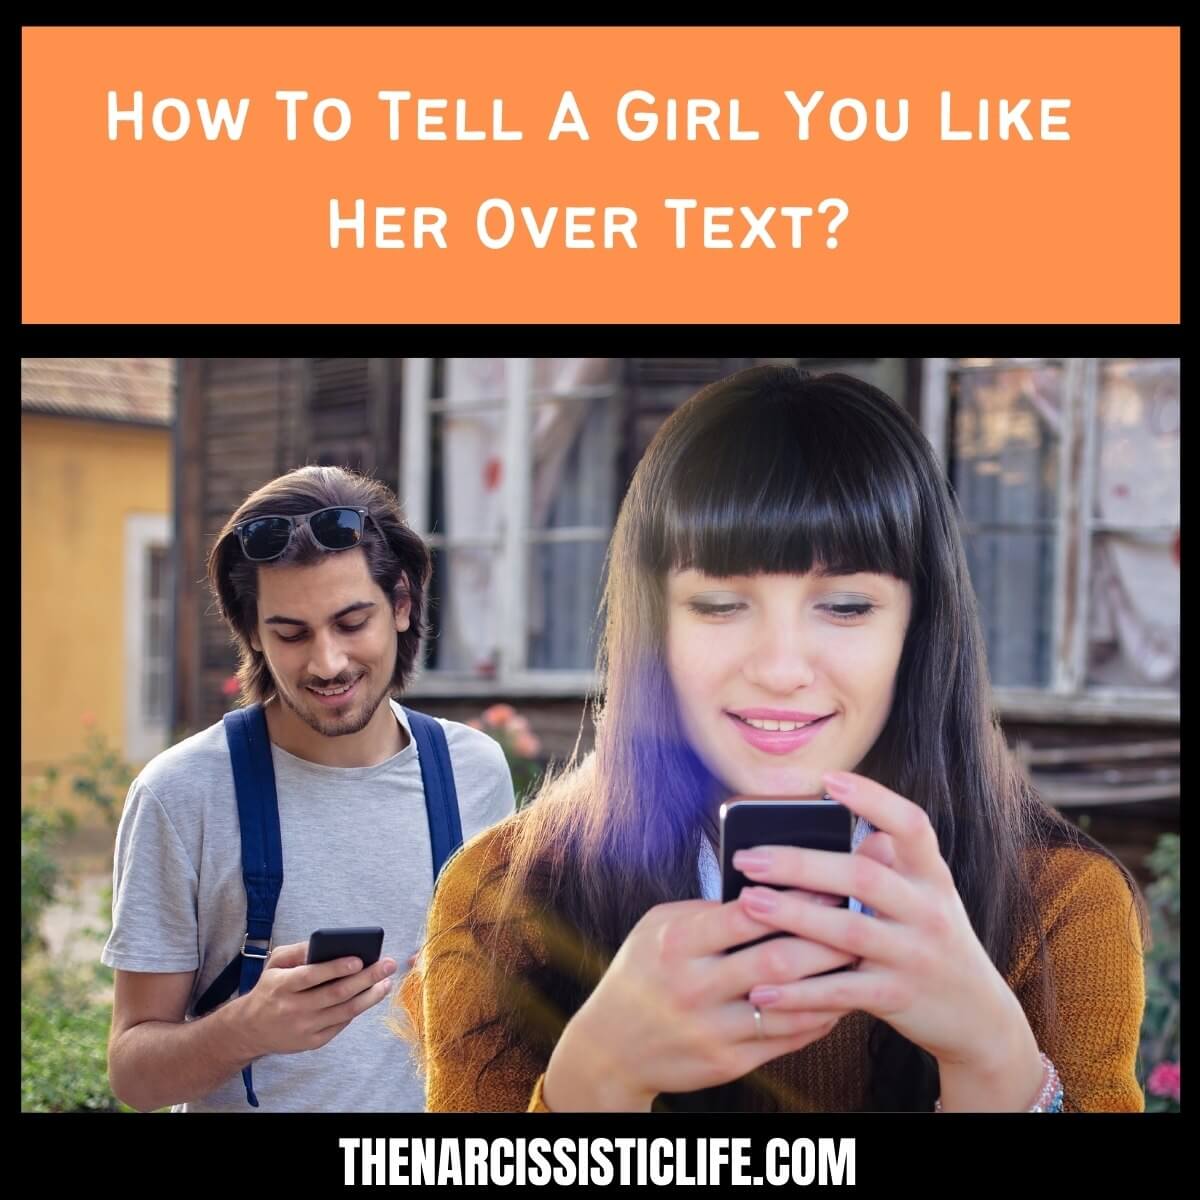 How To Tell A Girl You Like Her Over Text?